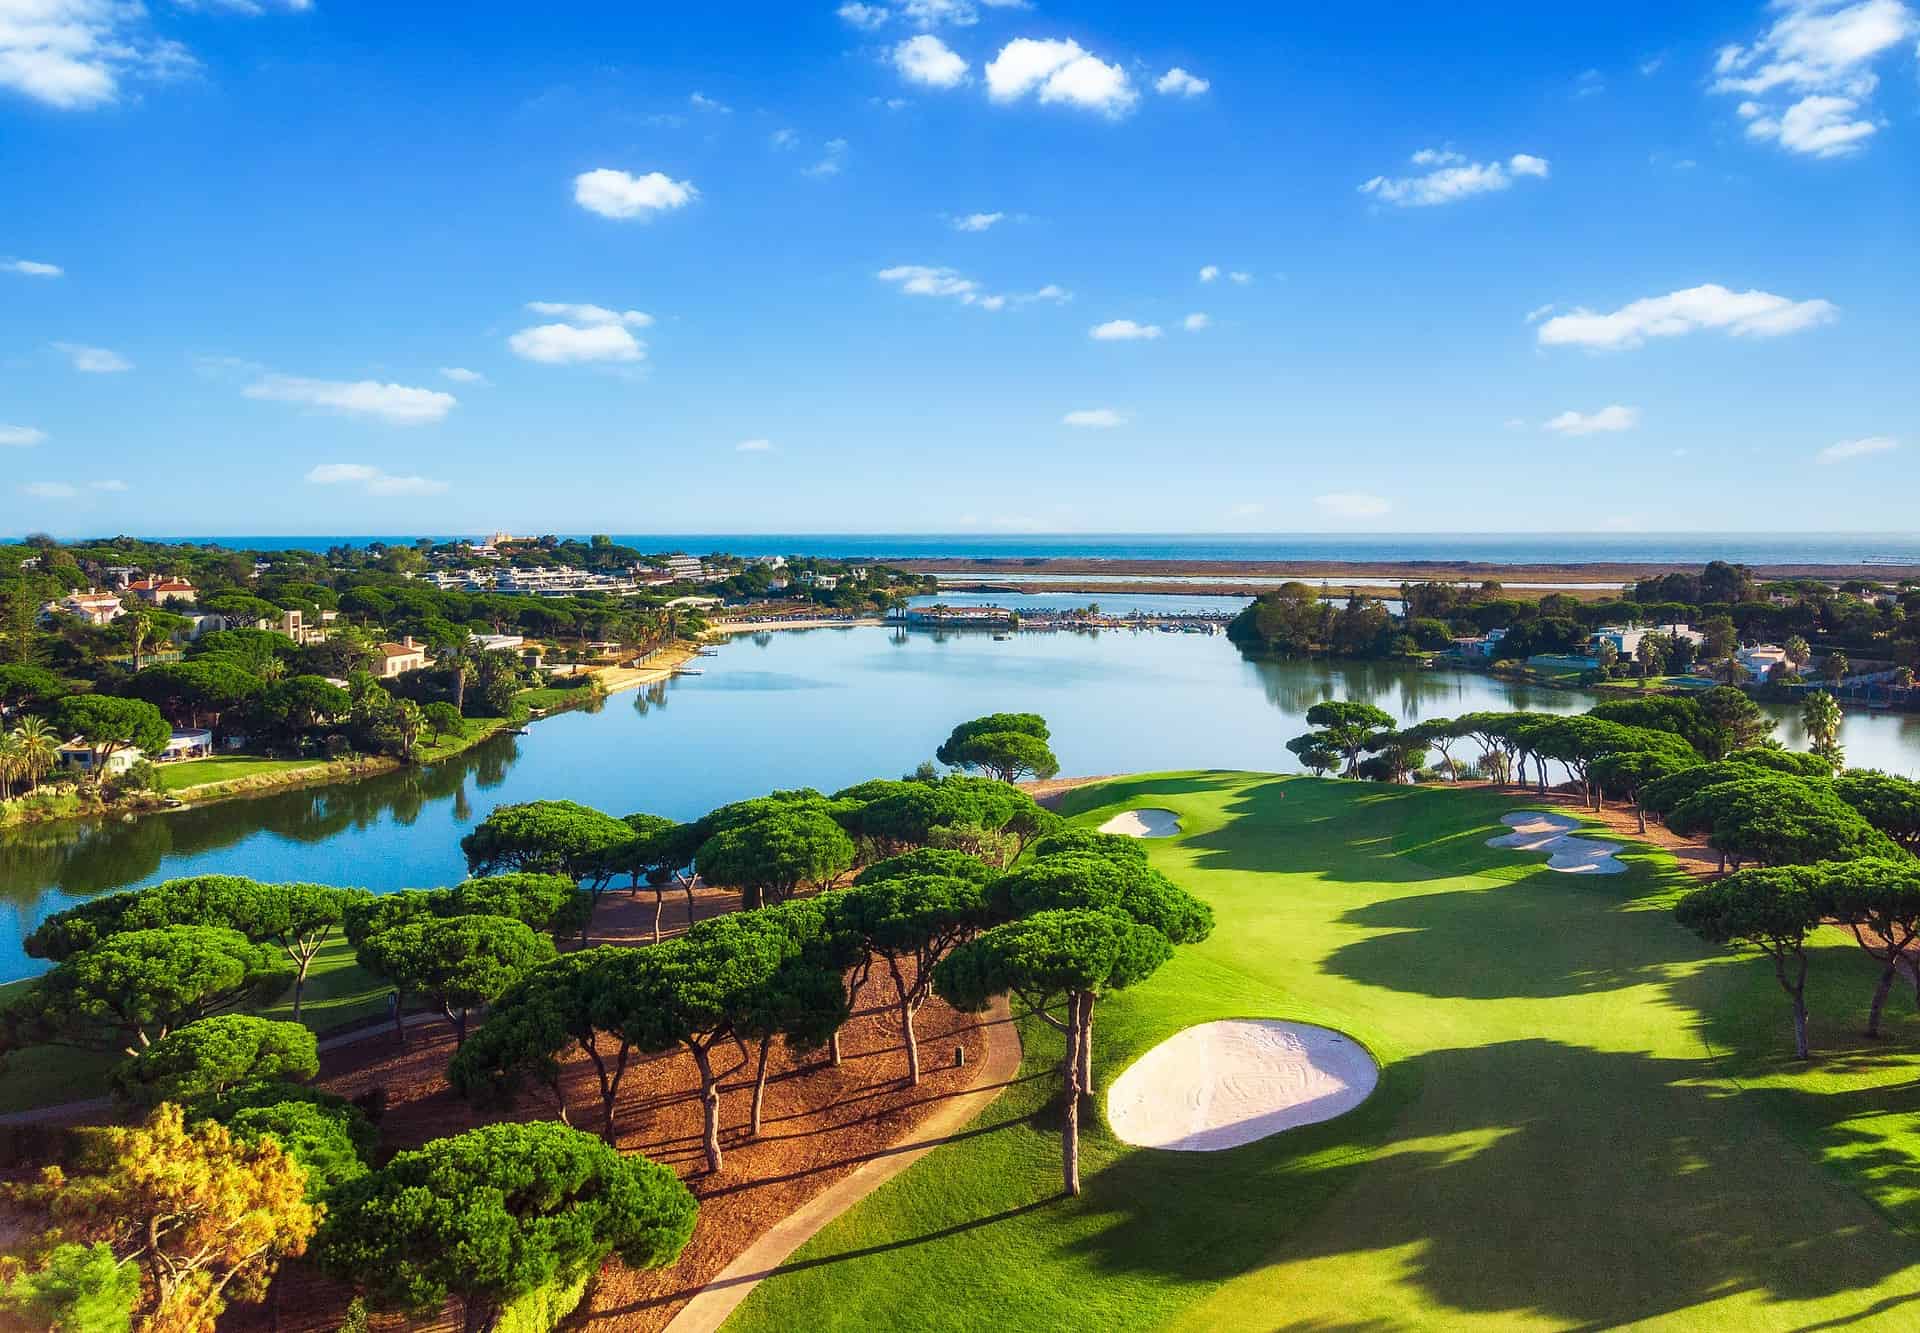 Quinta do Lago: The golfing haven offering a warm welcome, great climate, and stunning resorts